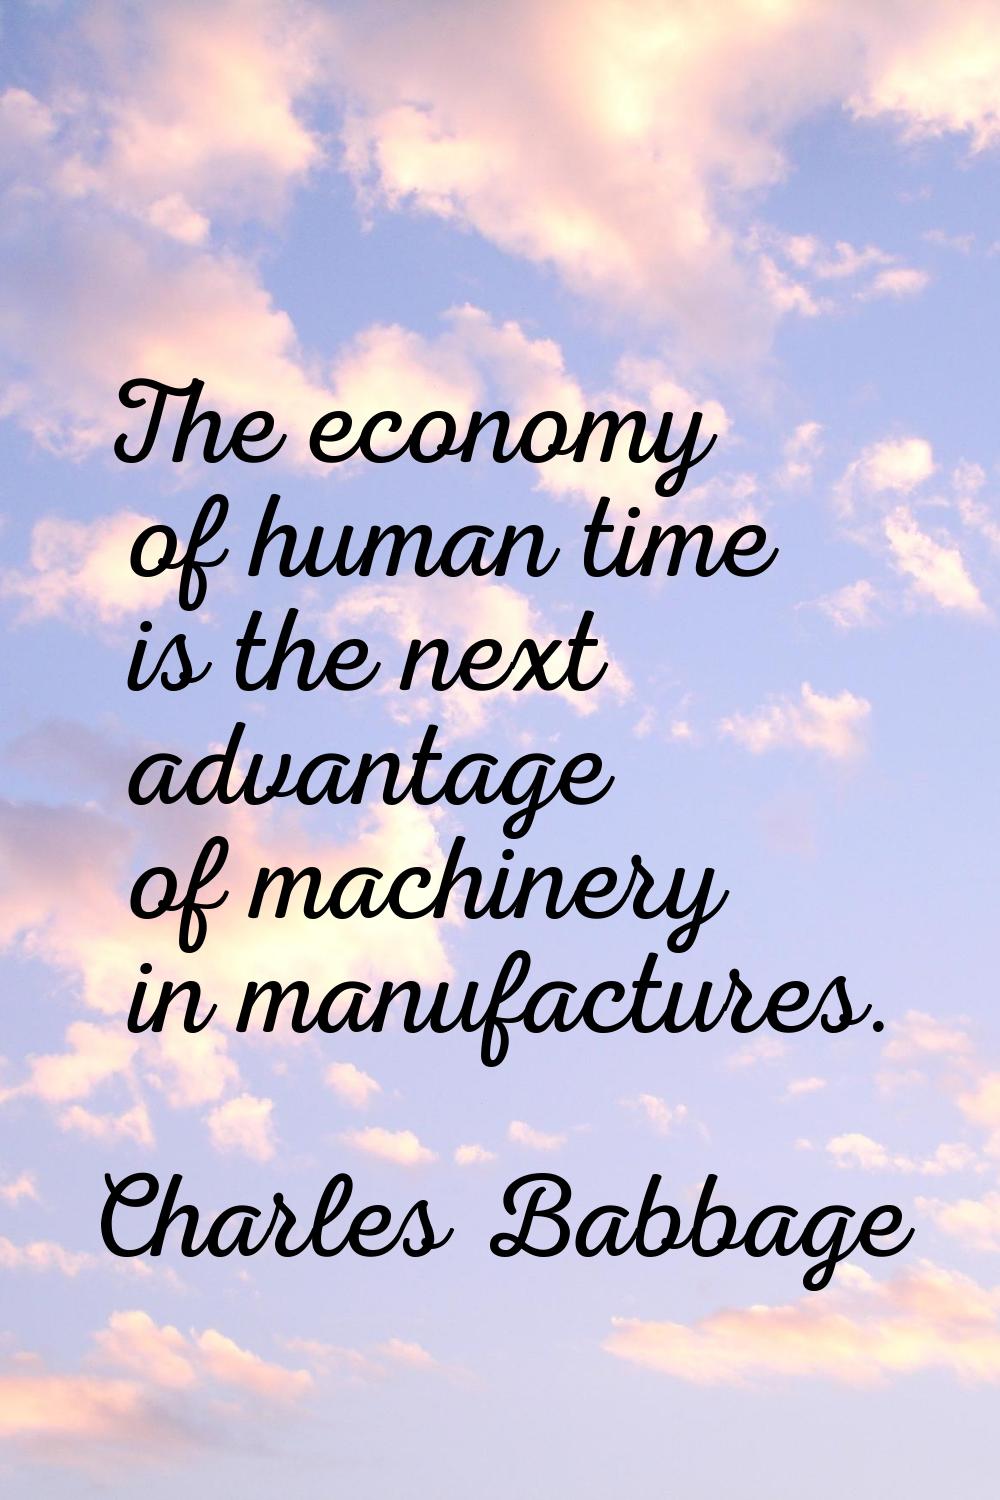 The economy of human time is the next advantage of machinery in manufactures.